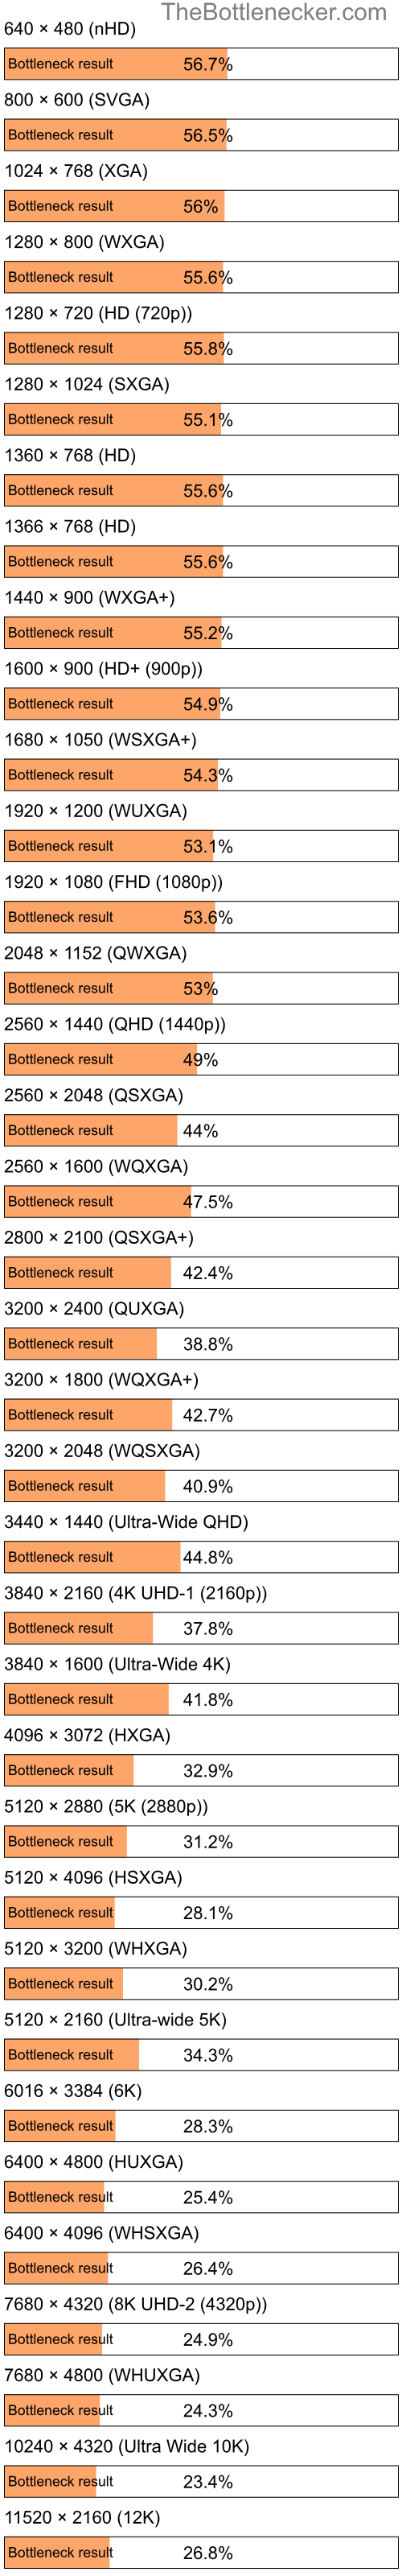 Bottleneck results by resolution for Intel Atom C2750 and NVIDIA GeForce GTX 1660 in General Tasks